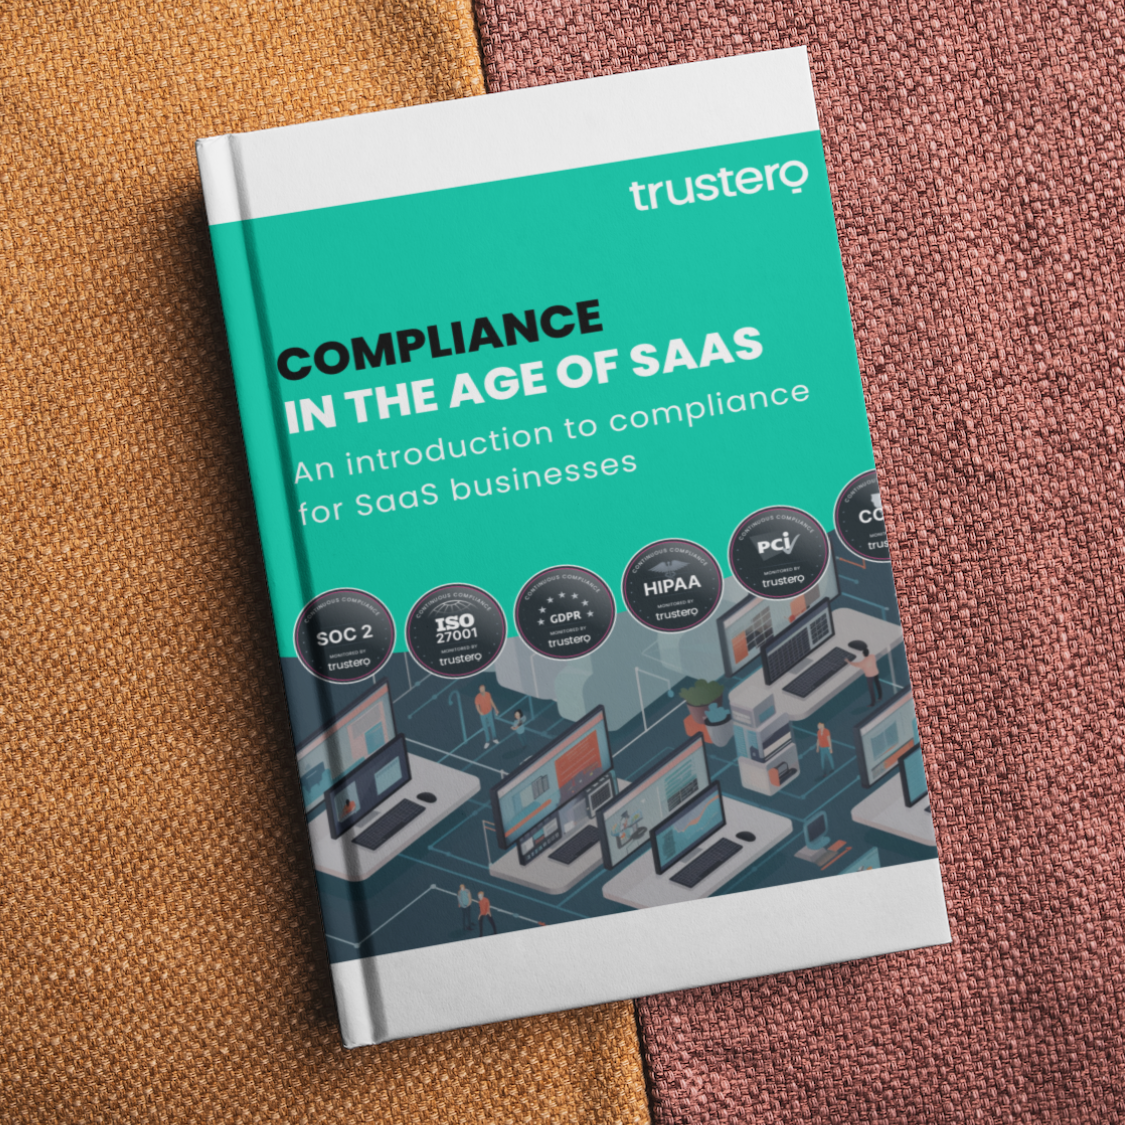 EBook Mockup - Compliance in the Age of SaaS